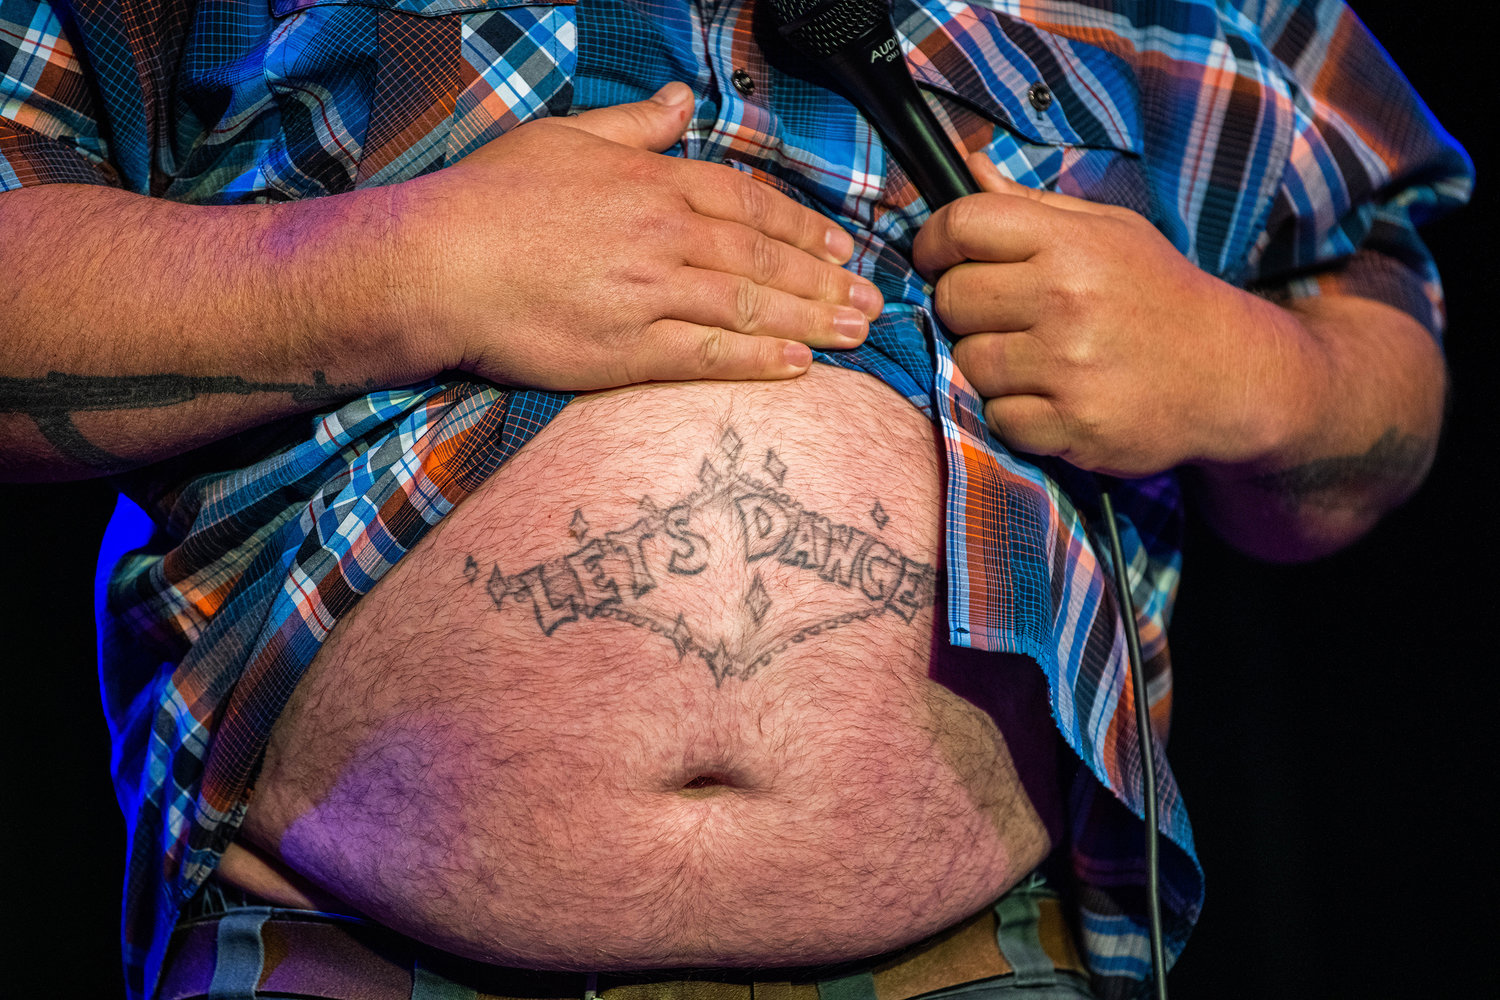 Local favorite Sam Miller shows off his stomach tattoo which reads, “Let’s Dance,” Friday night at the McFiler’s Chehalis Theater during a sold out comedy show.